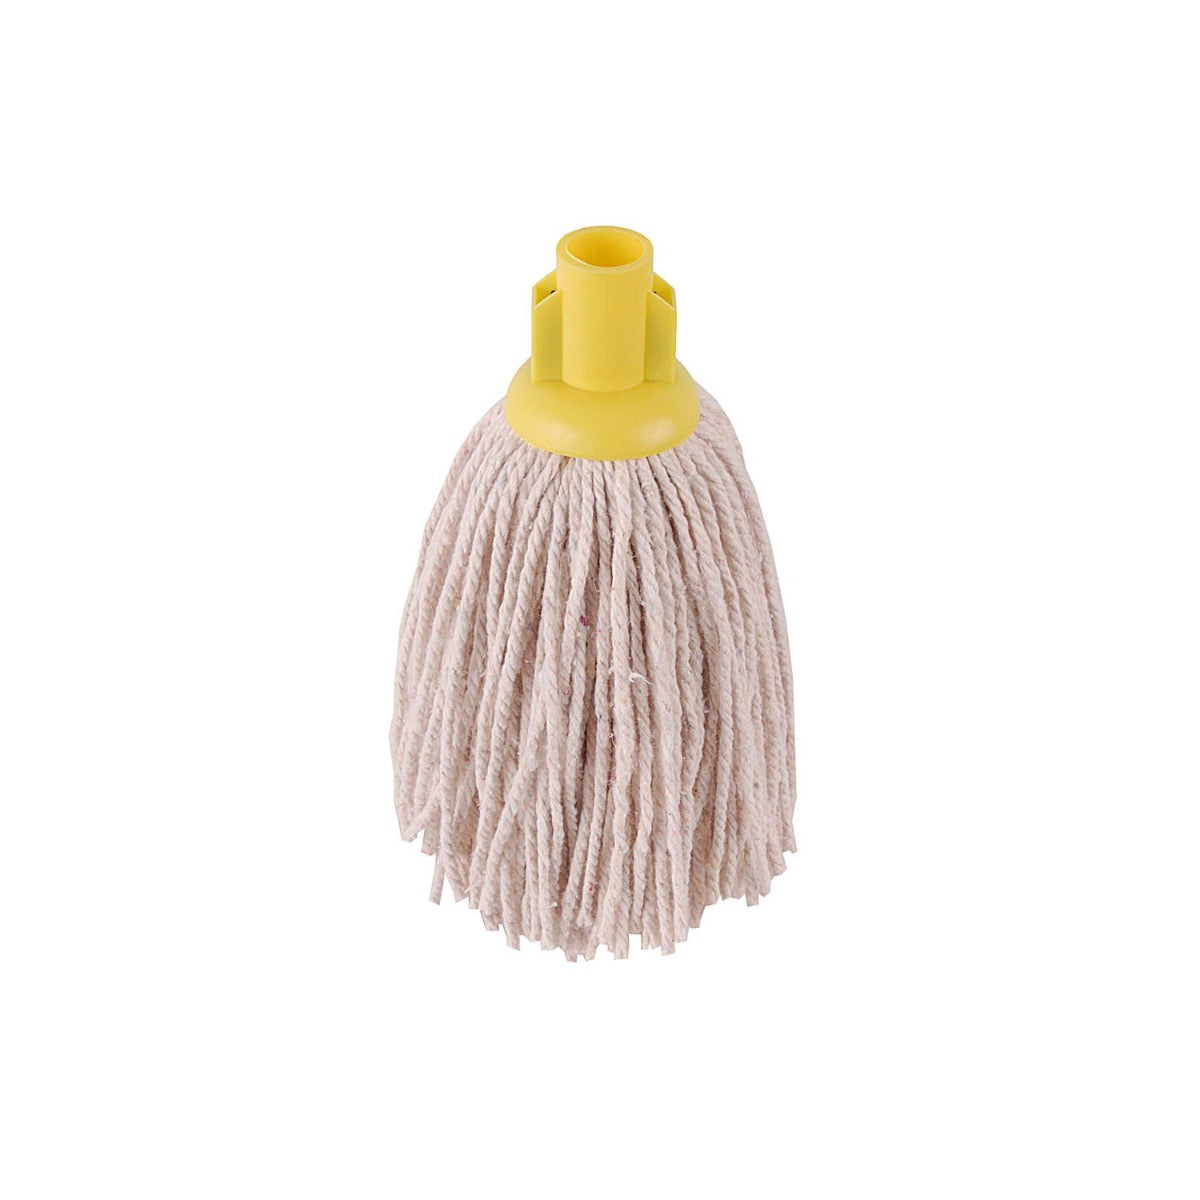 Purely Smile no12 PY Socket Mop Head Yellow Pack of 10